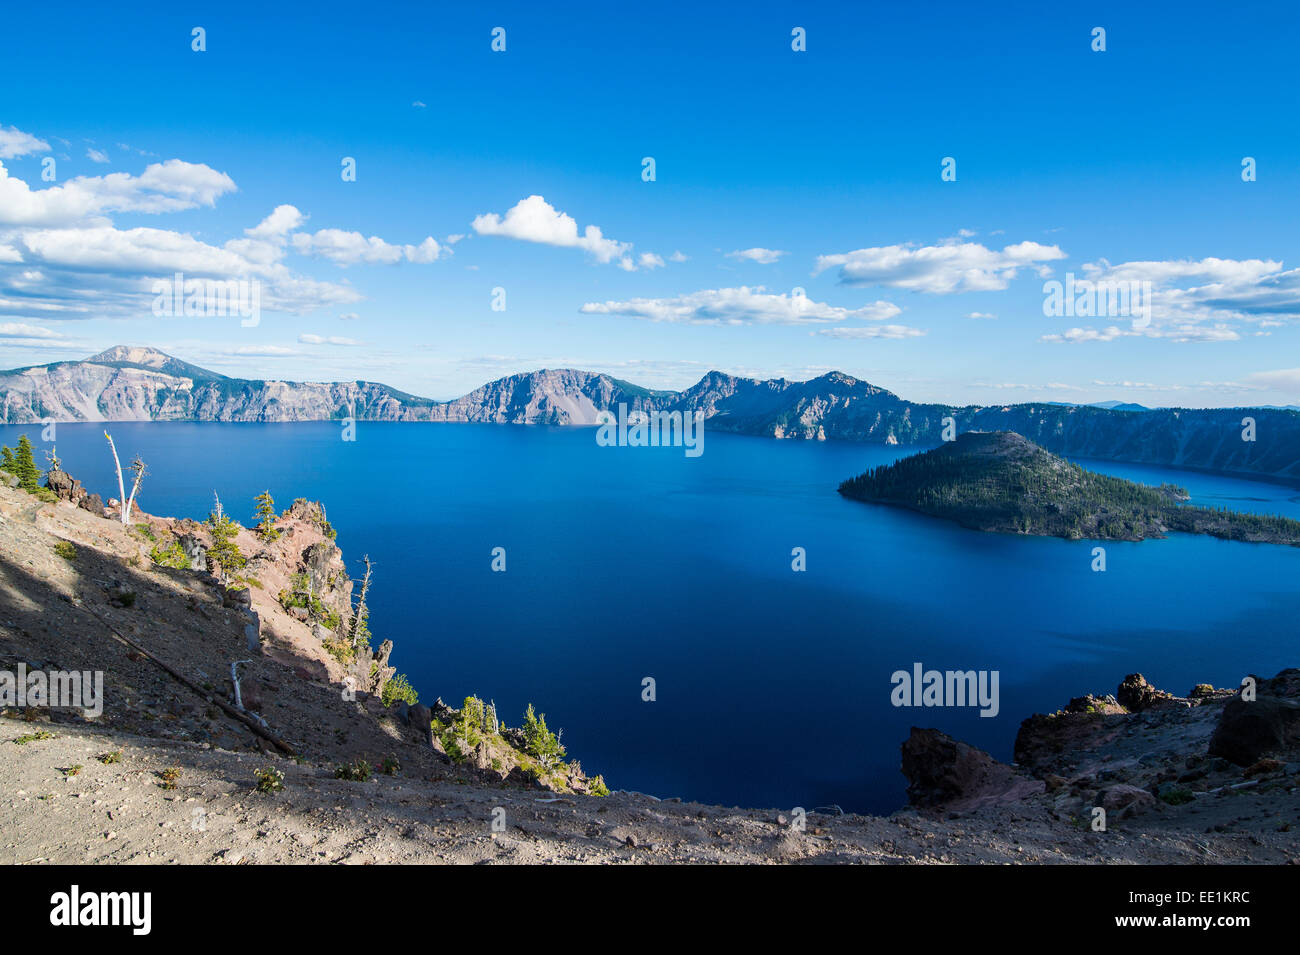 Late afternoon light on the Crater Lake of the Crater Lake National Park, Oregon, United States of America, North America Stock Photo